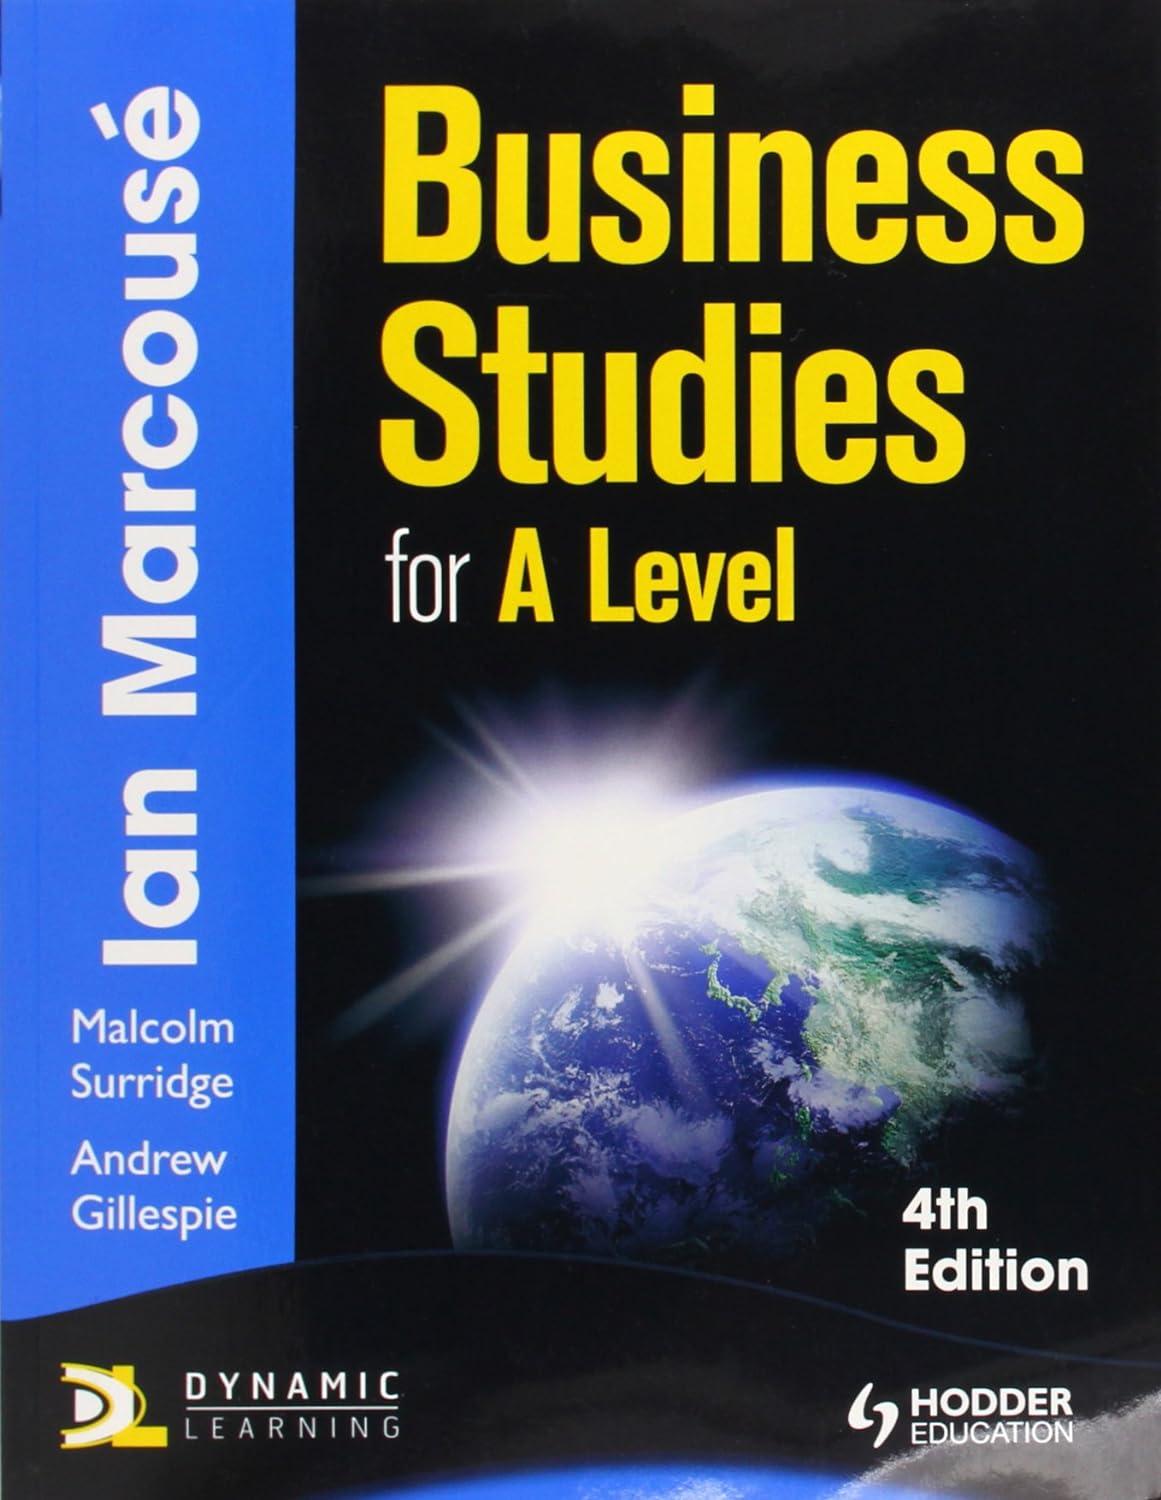 business studies for a level 4th edition ian marcouse 1444122754, 978-1444122756